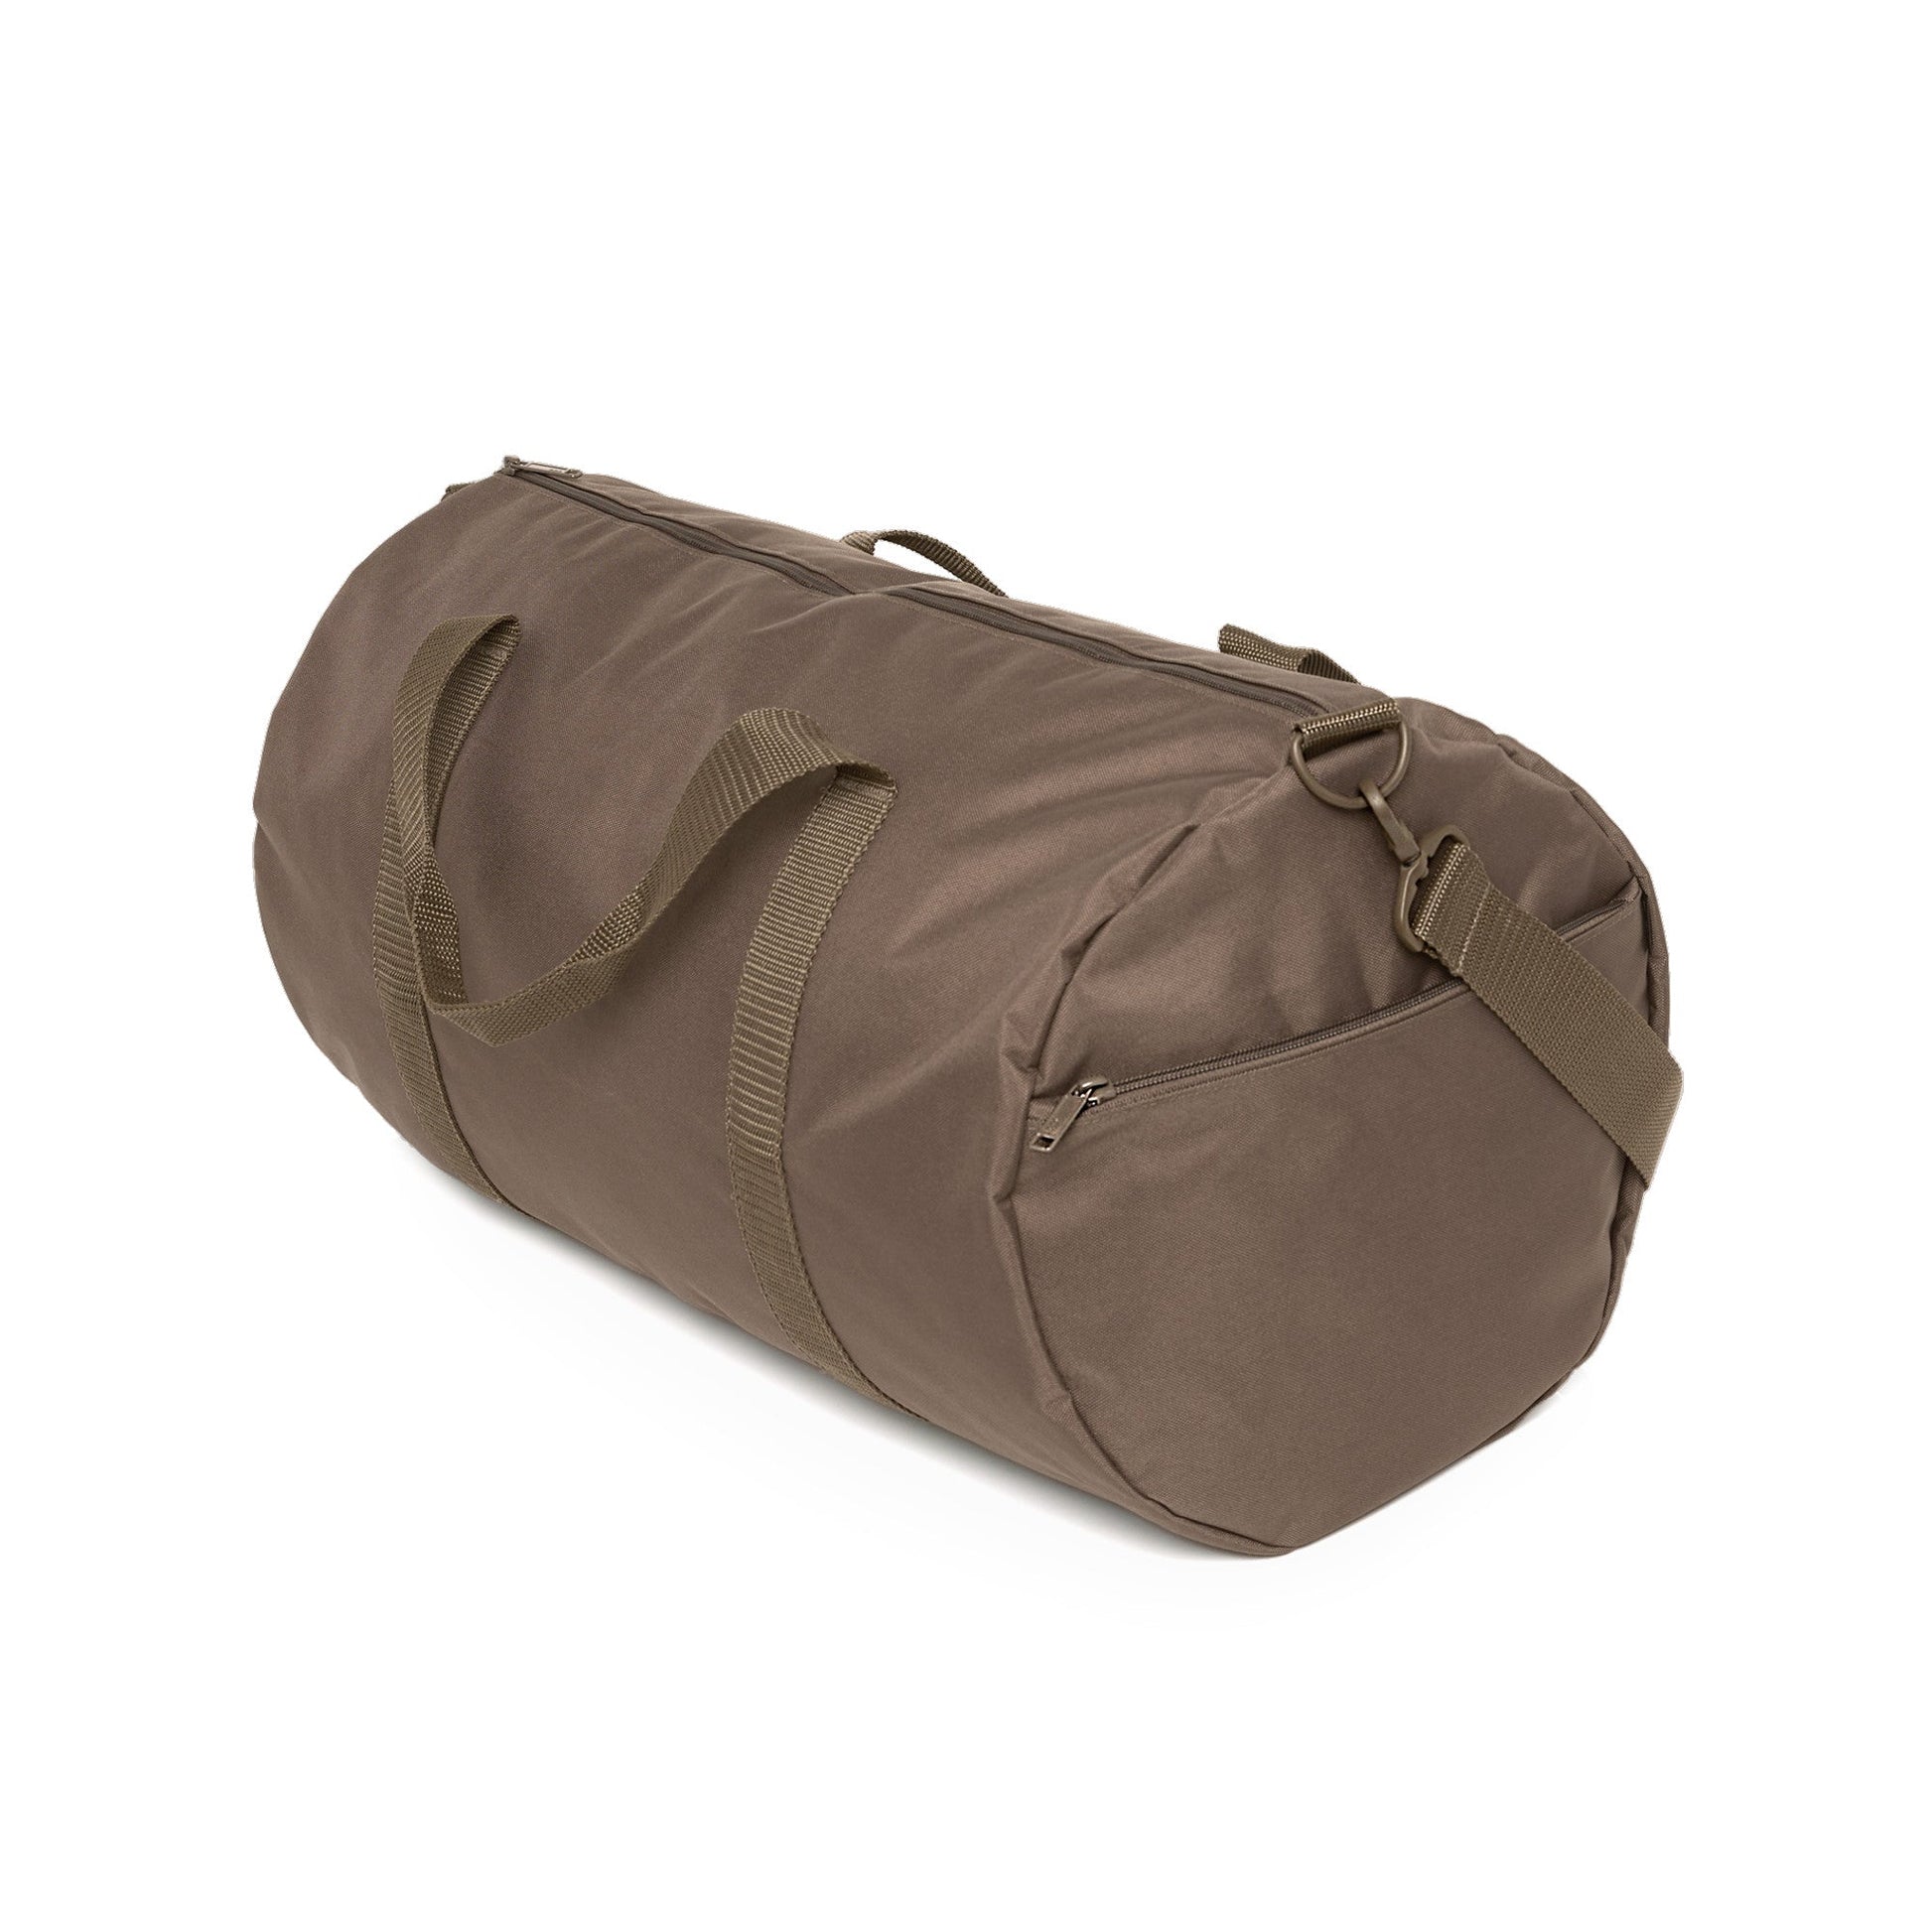 Meet our robust Cylinder Duffle Bag: Heavyweight 350 GSM 100% Recycled Polyester, boasting a 53-litre capacity. Features include a large main compartment, external zip pocket, and YKK nylon zip for secure travel. With reinforced adjustable straps and handles, this eco-friendly, spacious duffle bag offers both durability and convenience.